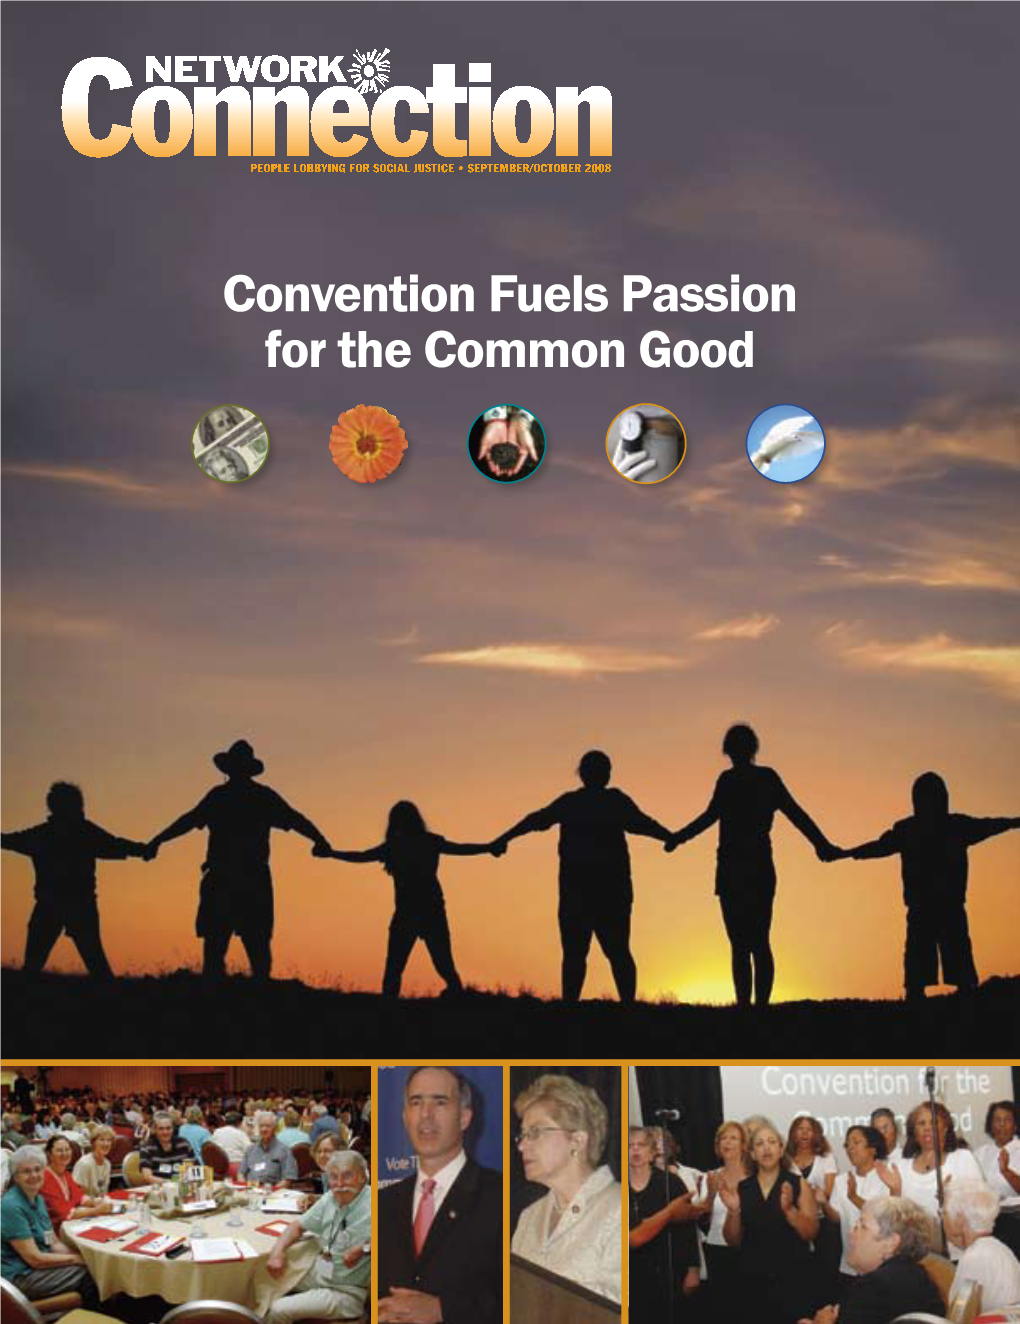 Convention Fuels Passion for the Common Good